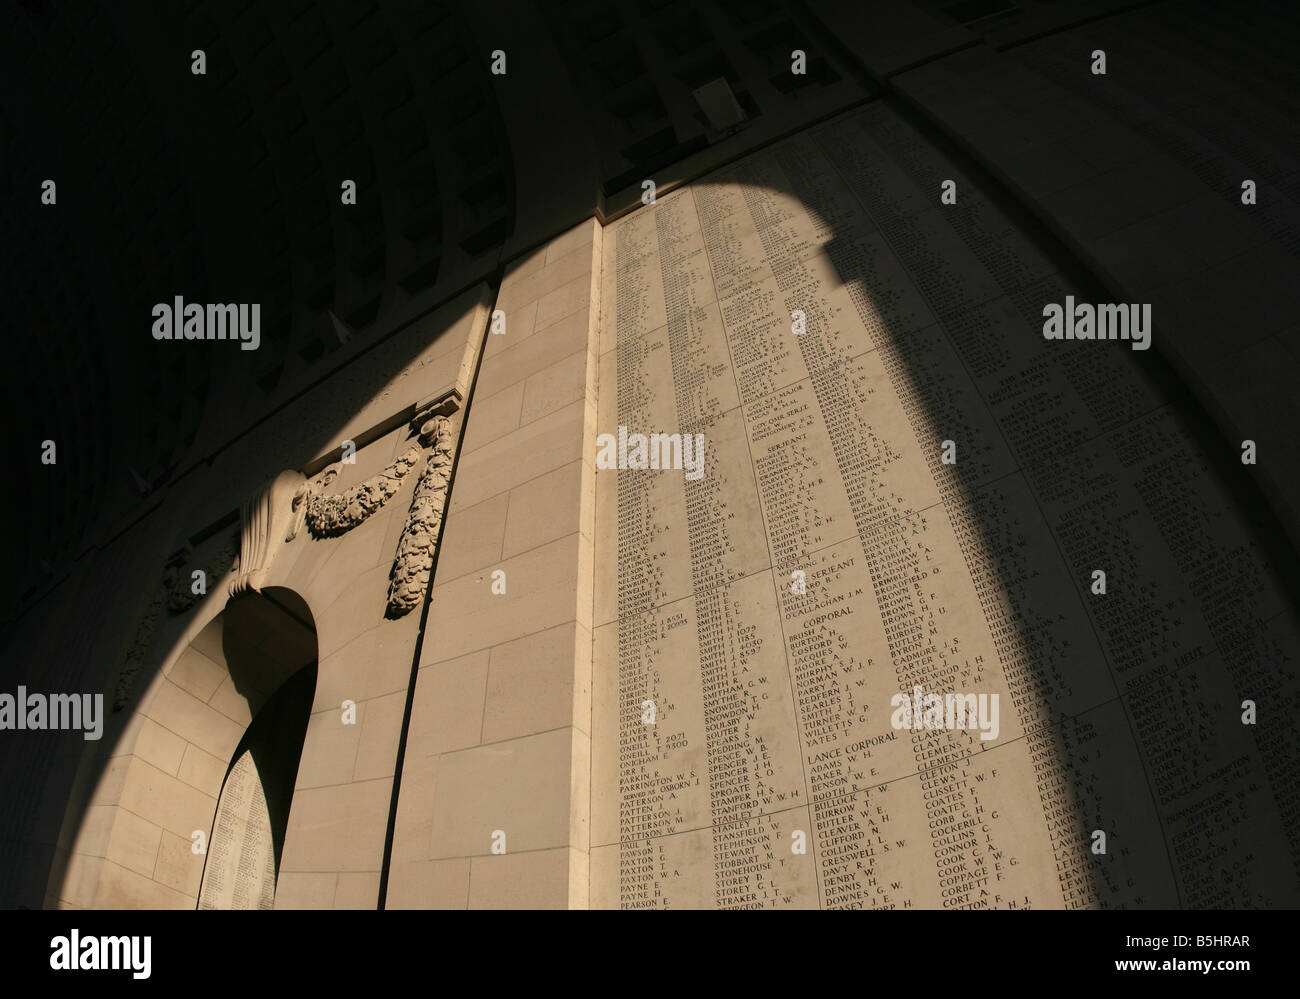 Names of the missing on the walls of the Menin Gate, Ypres. Stock Photo